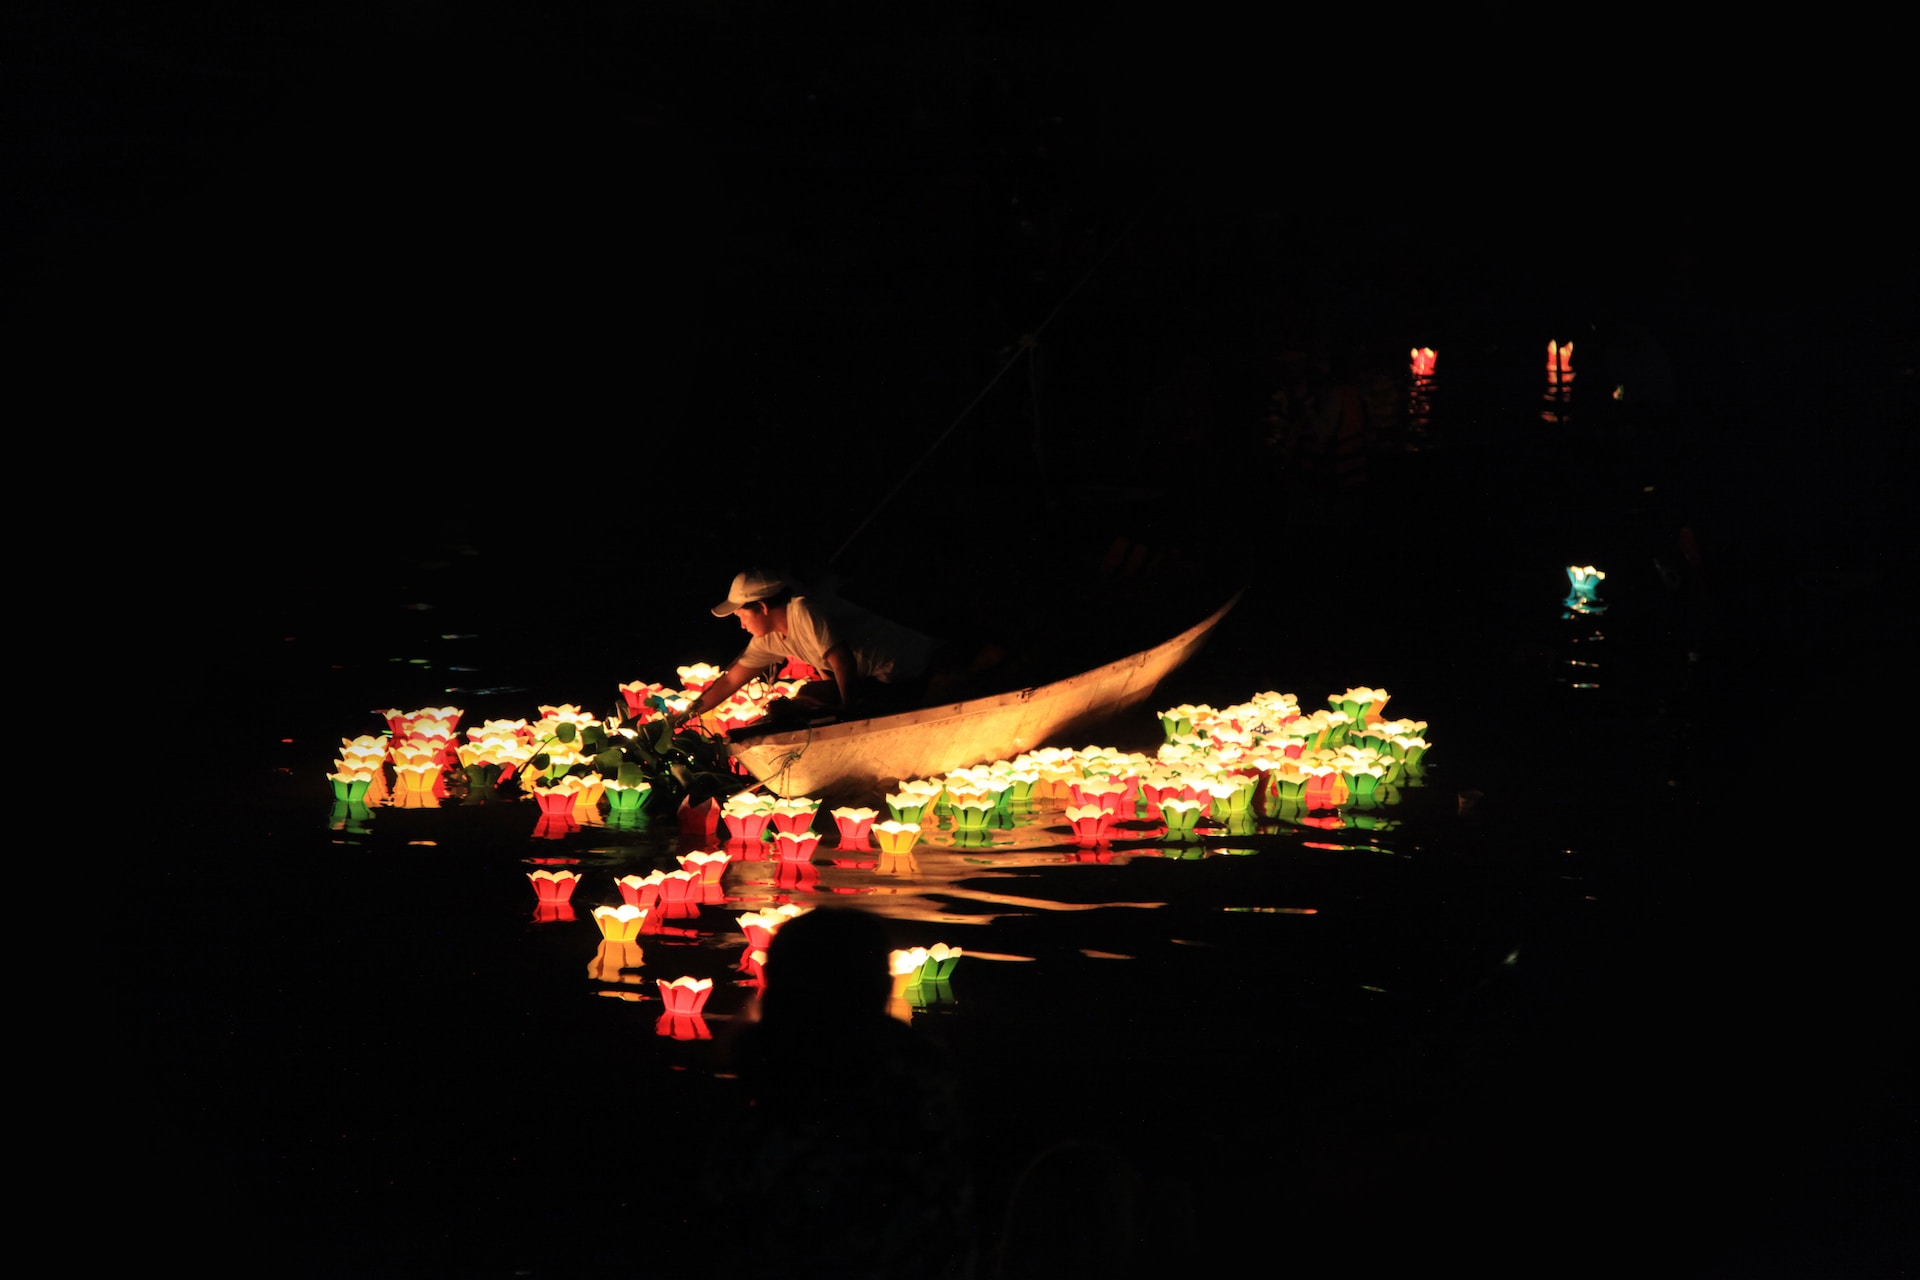 Full moon day in Hoi An